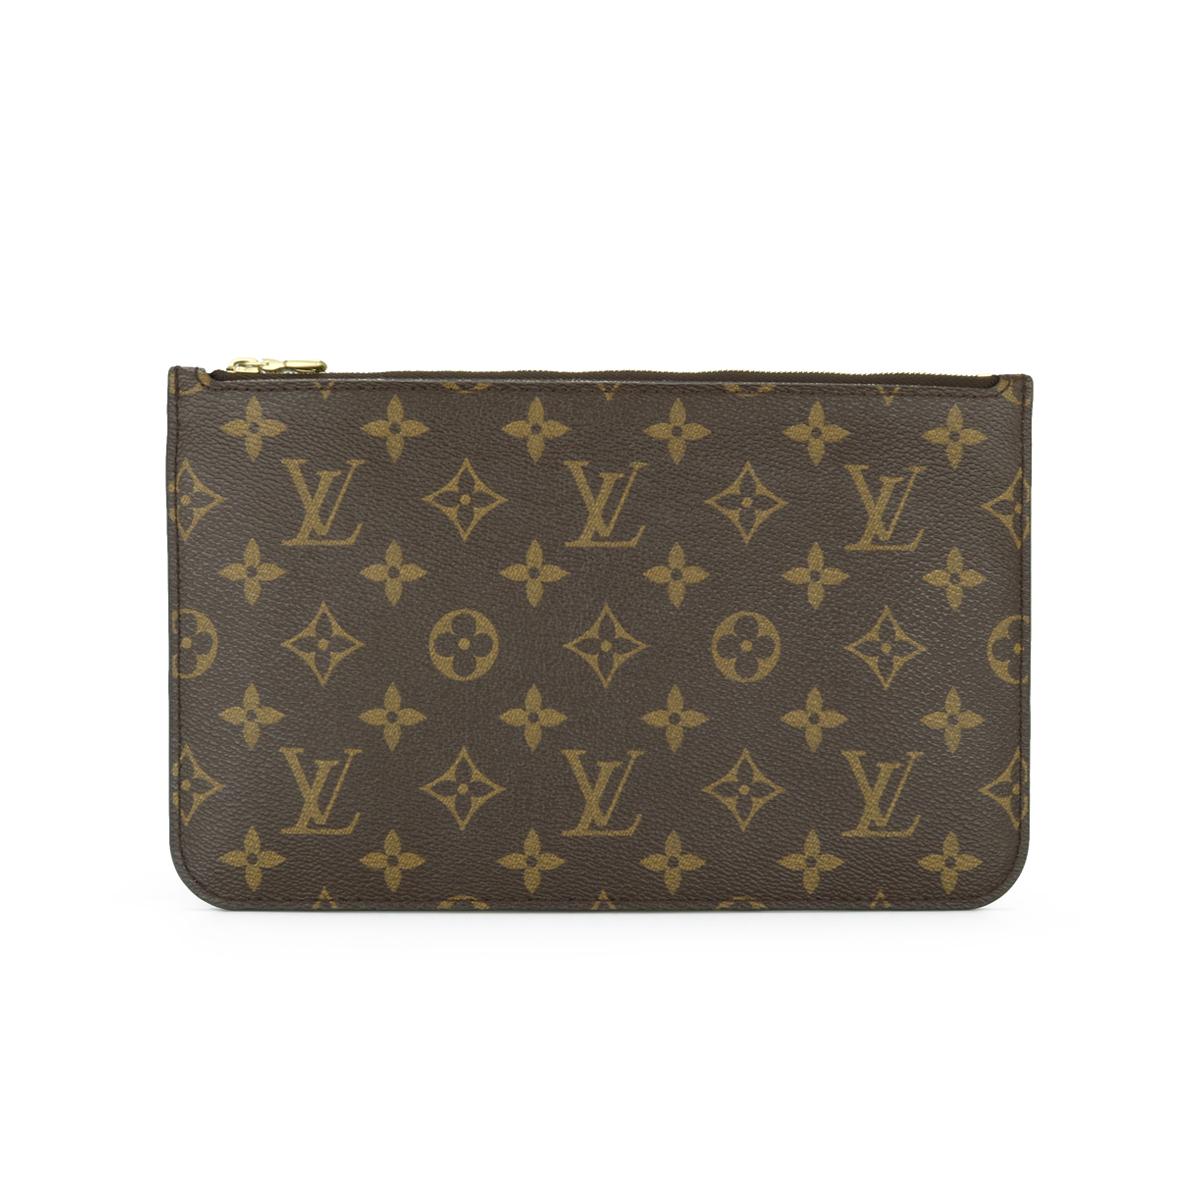 Louis Vuitton Neverfull MM Zip Pochette Pouch in Monogram with Beige Interior 2018.

This pouch is in very good condition. 

- Exterior Condition: Very good condition. The outside of the pouch shows minor signs of wear. There is inking wear to the